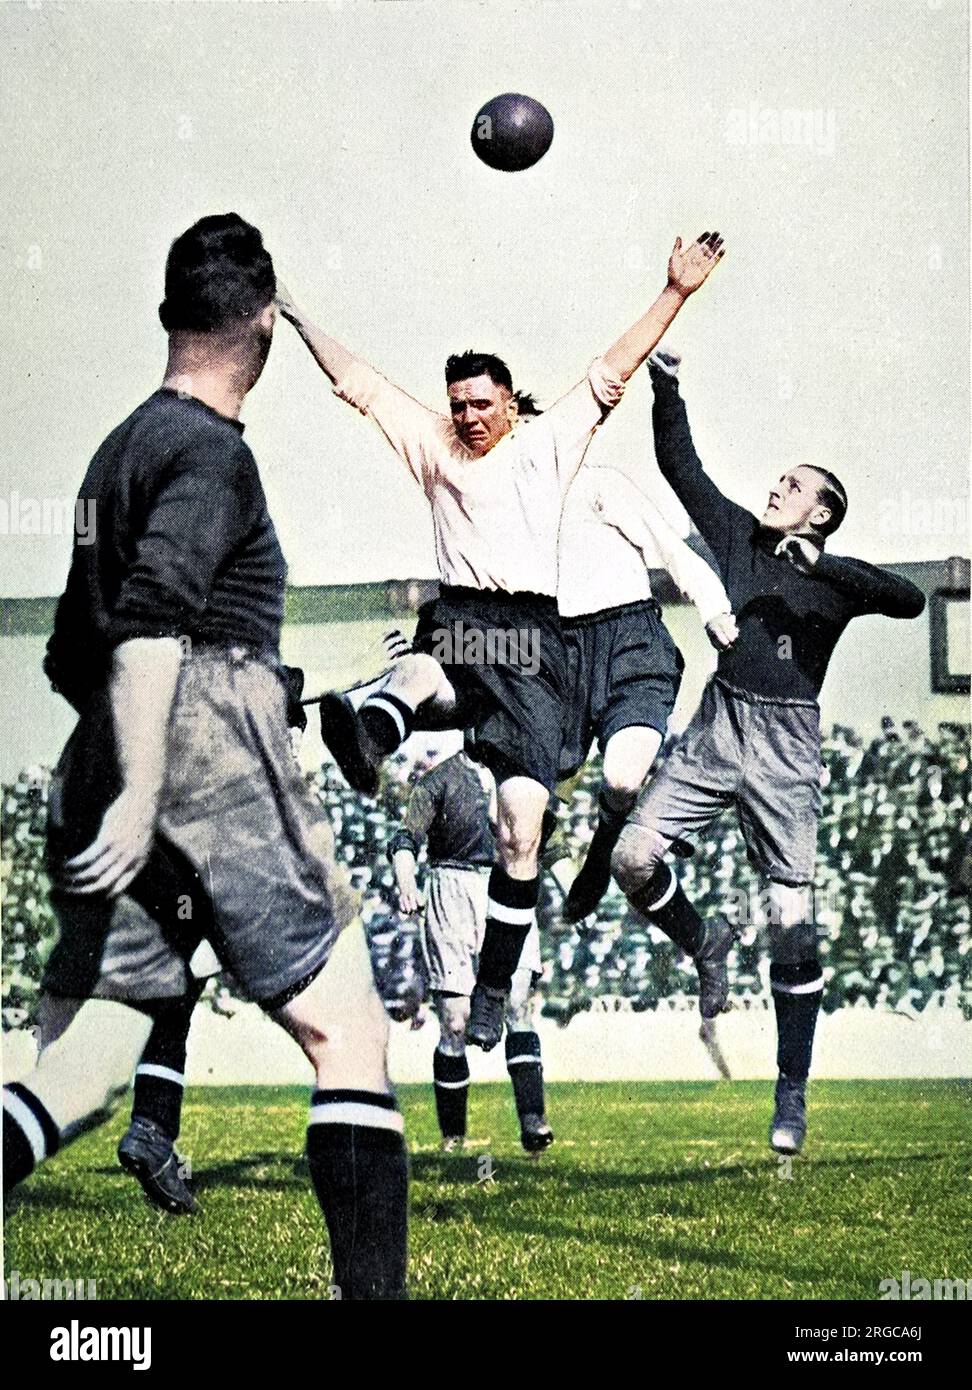 Photograph of a scramble in the goalmouth during a Second Division match between Tottenham Hotspur and Bury, held at White Hart Lane, during the 1929-30 season. The game resulted in a two-all draw. Stock Photo